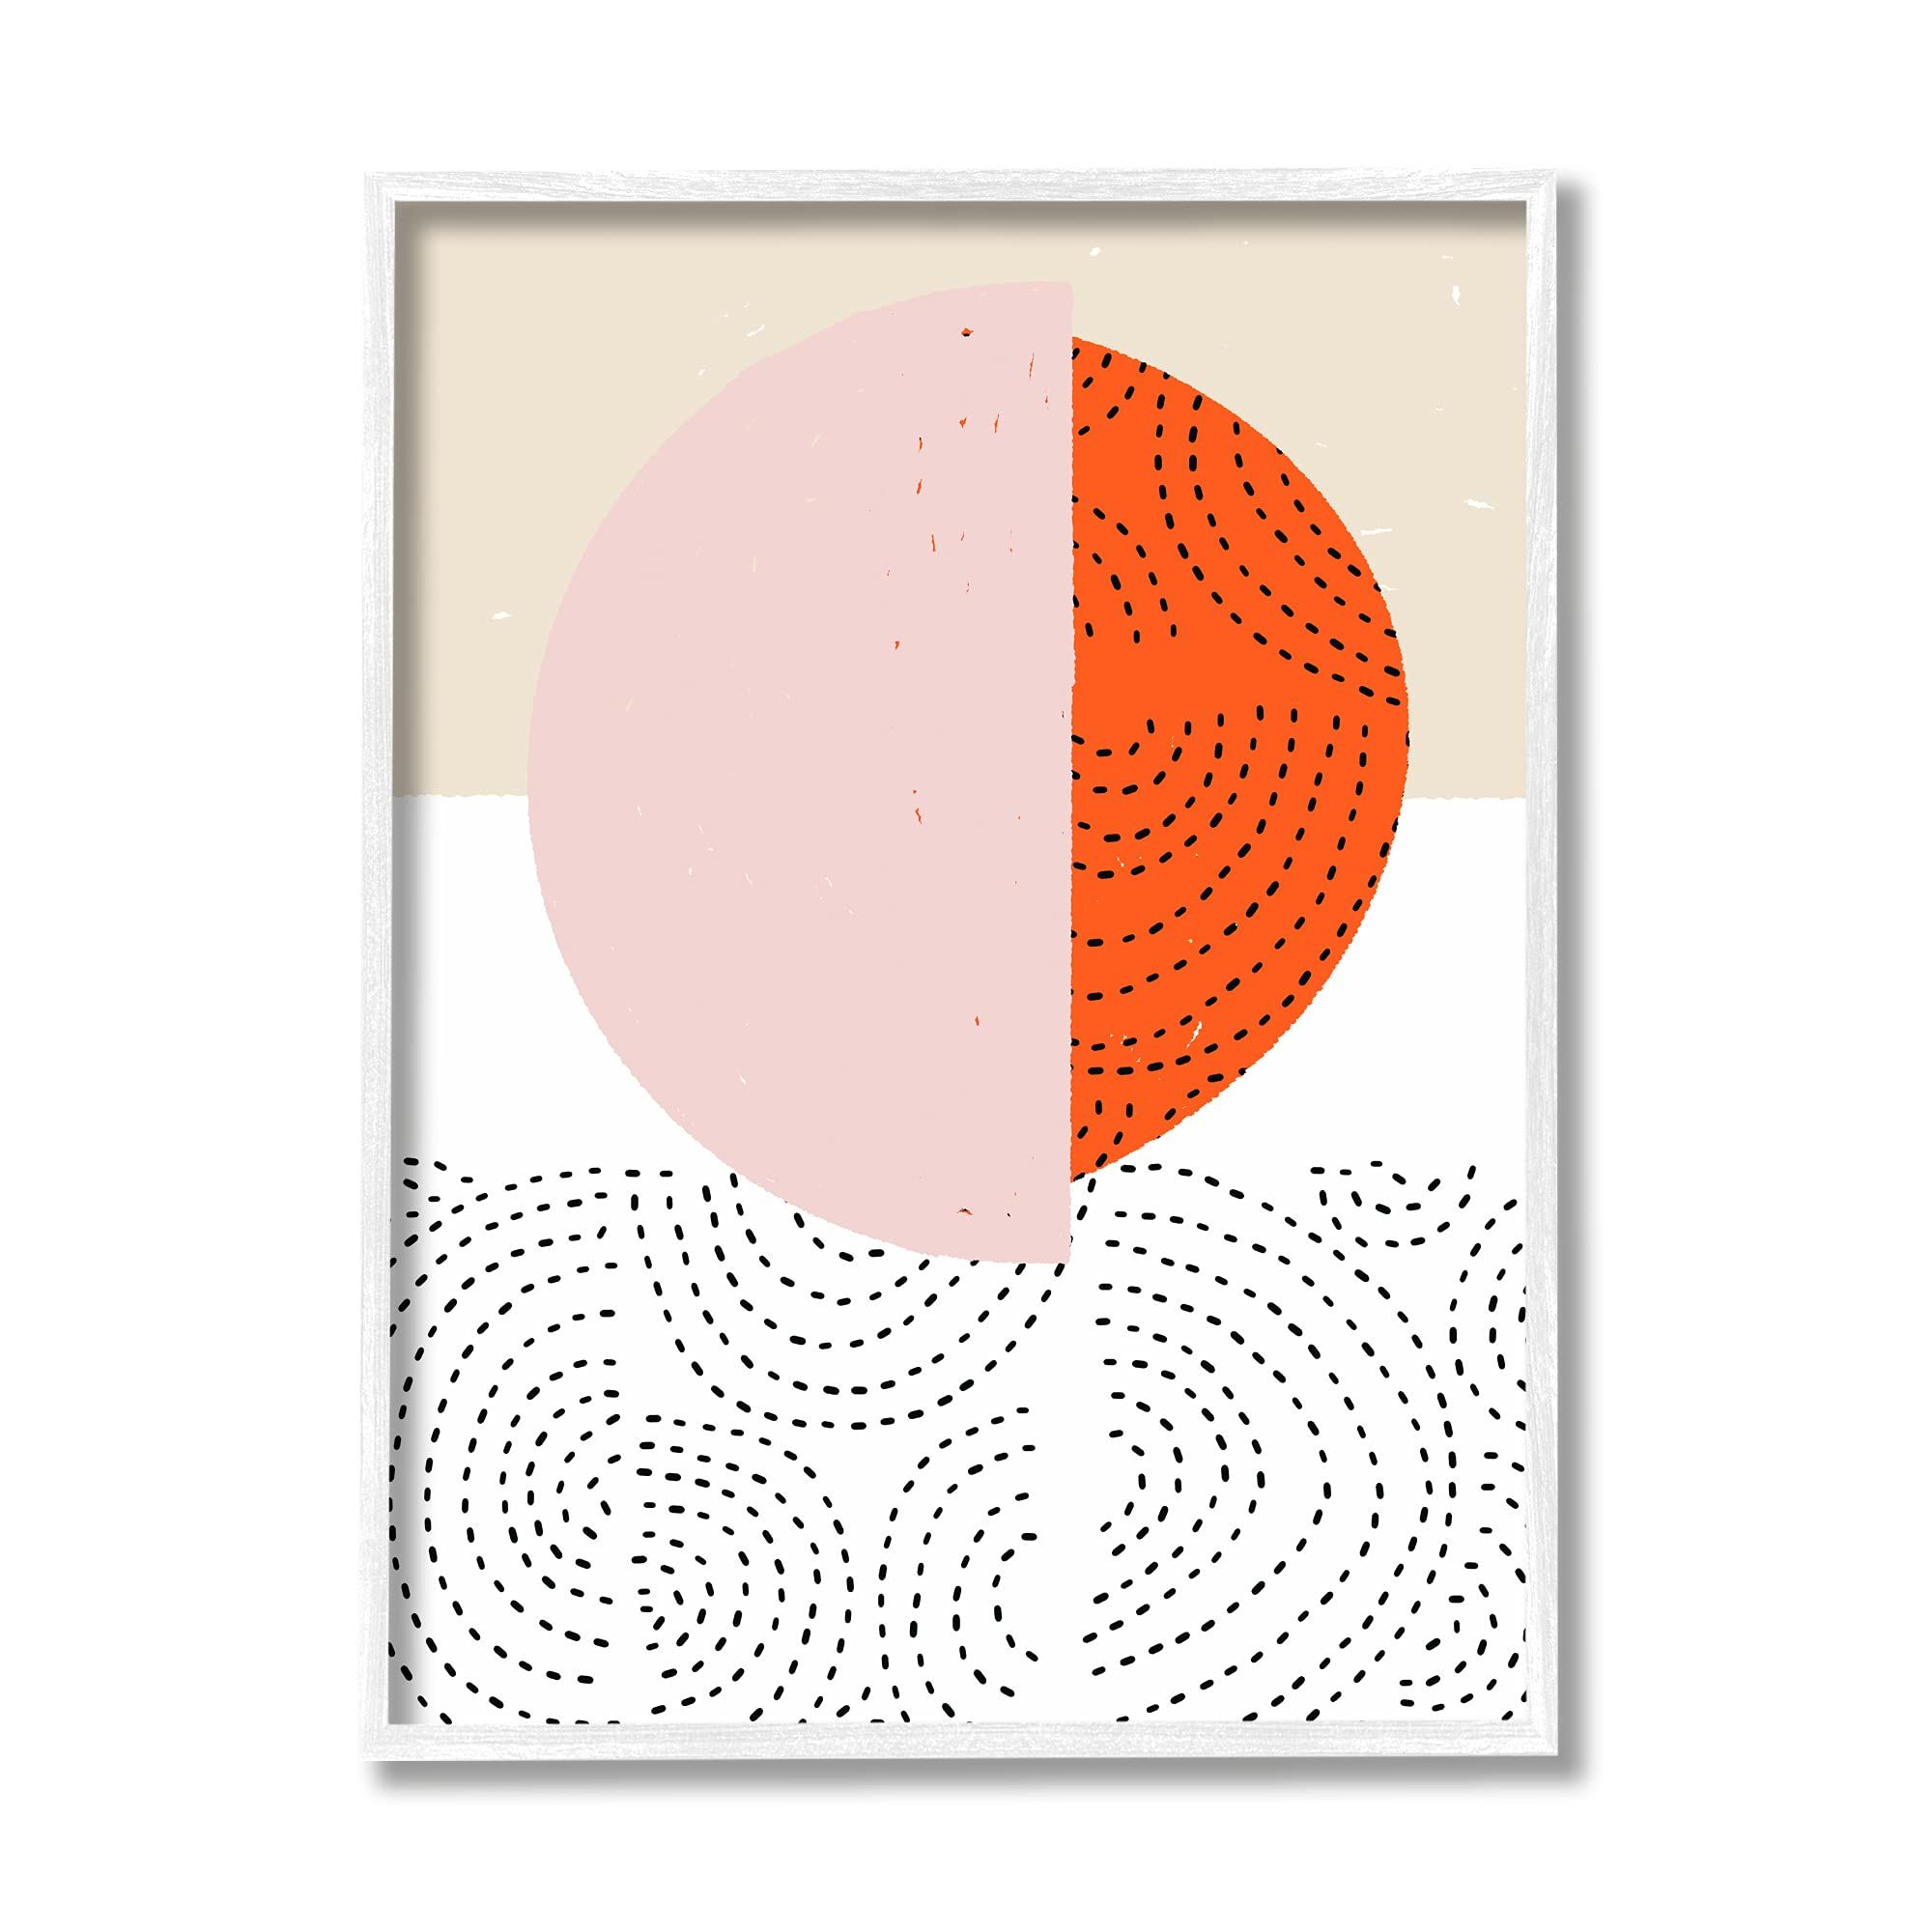 Newest Sun Abstraction Wall Art Pertaining To Amazon: Stupell Industries Asymmetrical Sun Horizon Geometric  Abstraction Dotted Lines, Designedjen Bucheli White Framed Wall Art, 16  X 20, Orange : Clothing, Shoes & Jewelry (View 15 of 15)